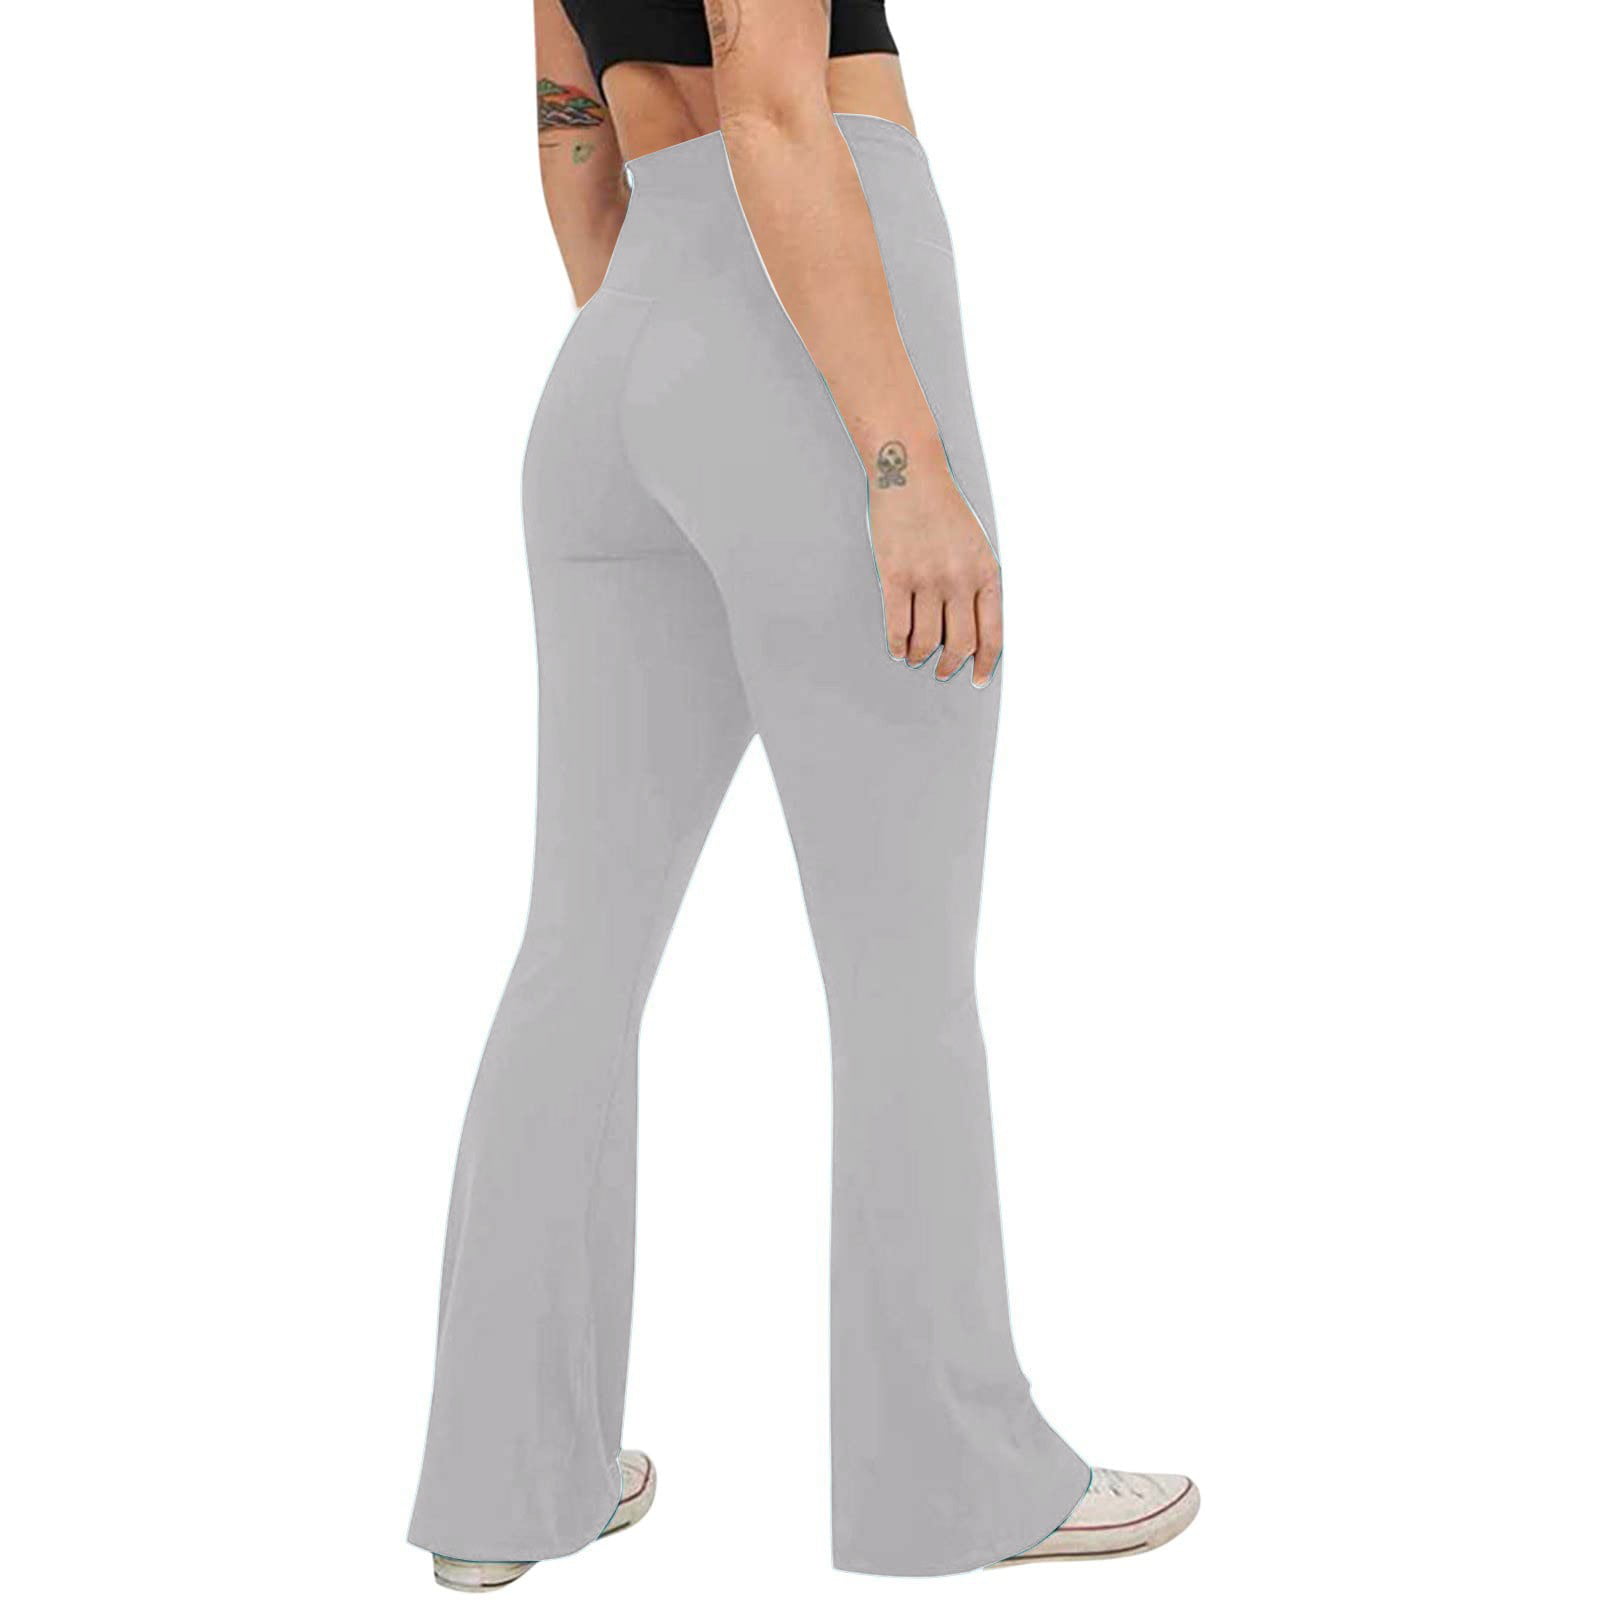 HEGALY Women's Flare Yoga Pants - Crossover Flare Georgia